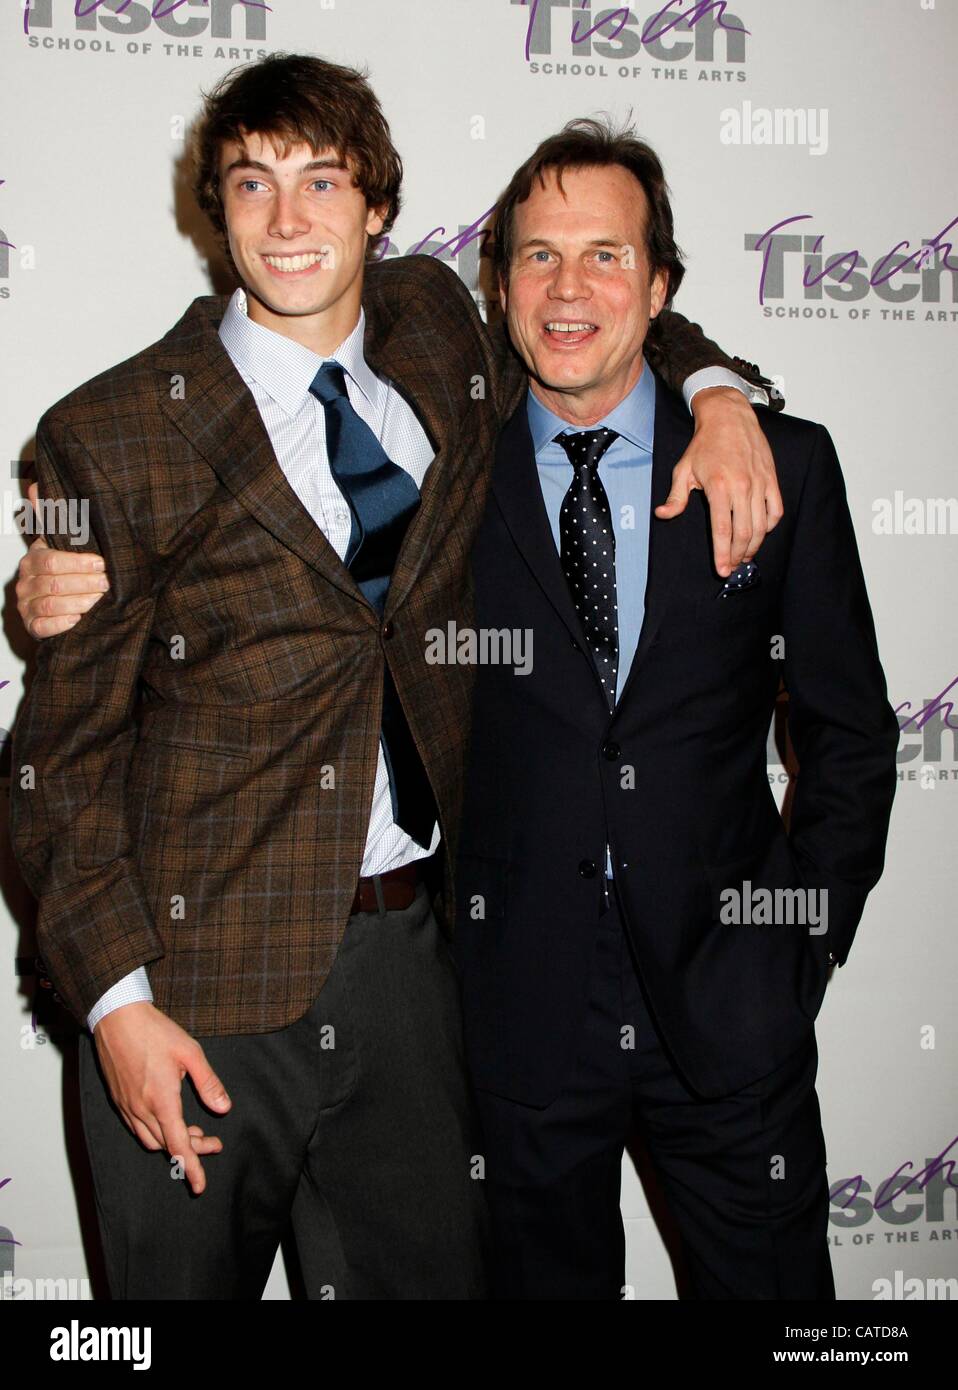 Bill Paxton, son James at arrivals for Ordinary Miraculous: Celebrating Vision at Tisch School of the Arts at NYU, Marriott Marquis Hotel, New York, NY April 19, 2012. Photo By: F. Burton Patrick/Everett Collection Stock Photo